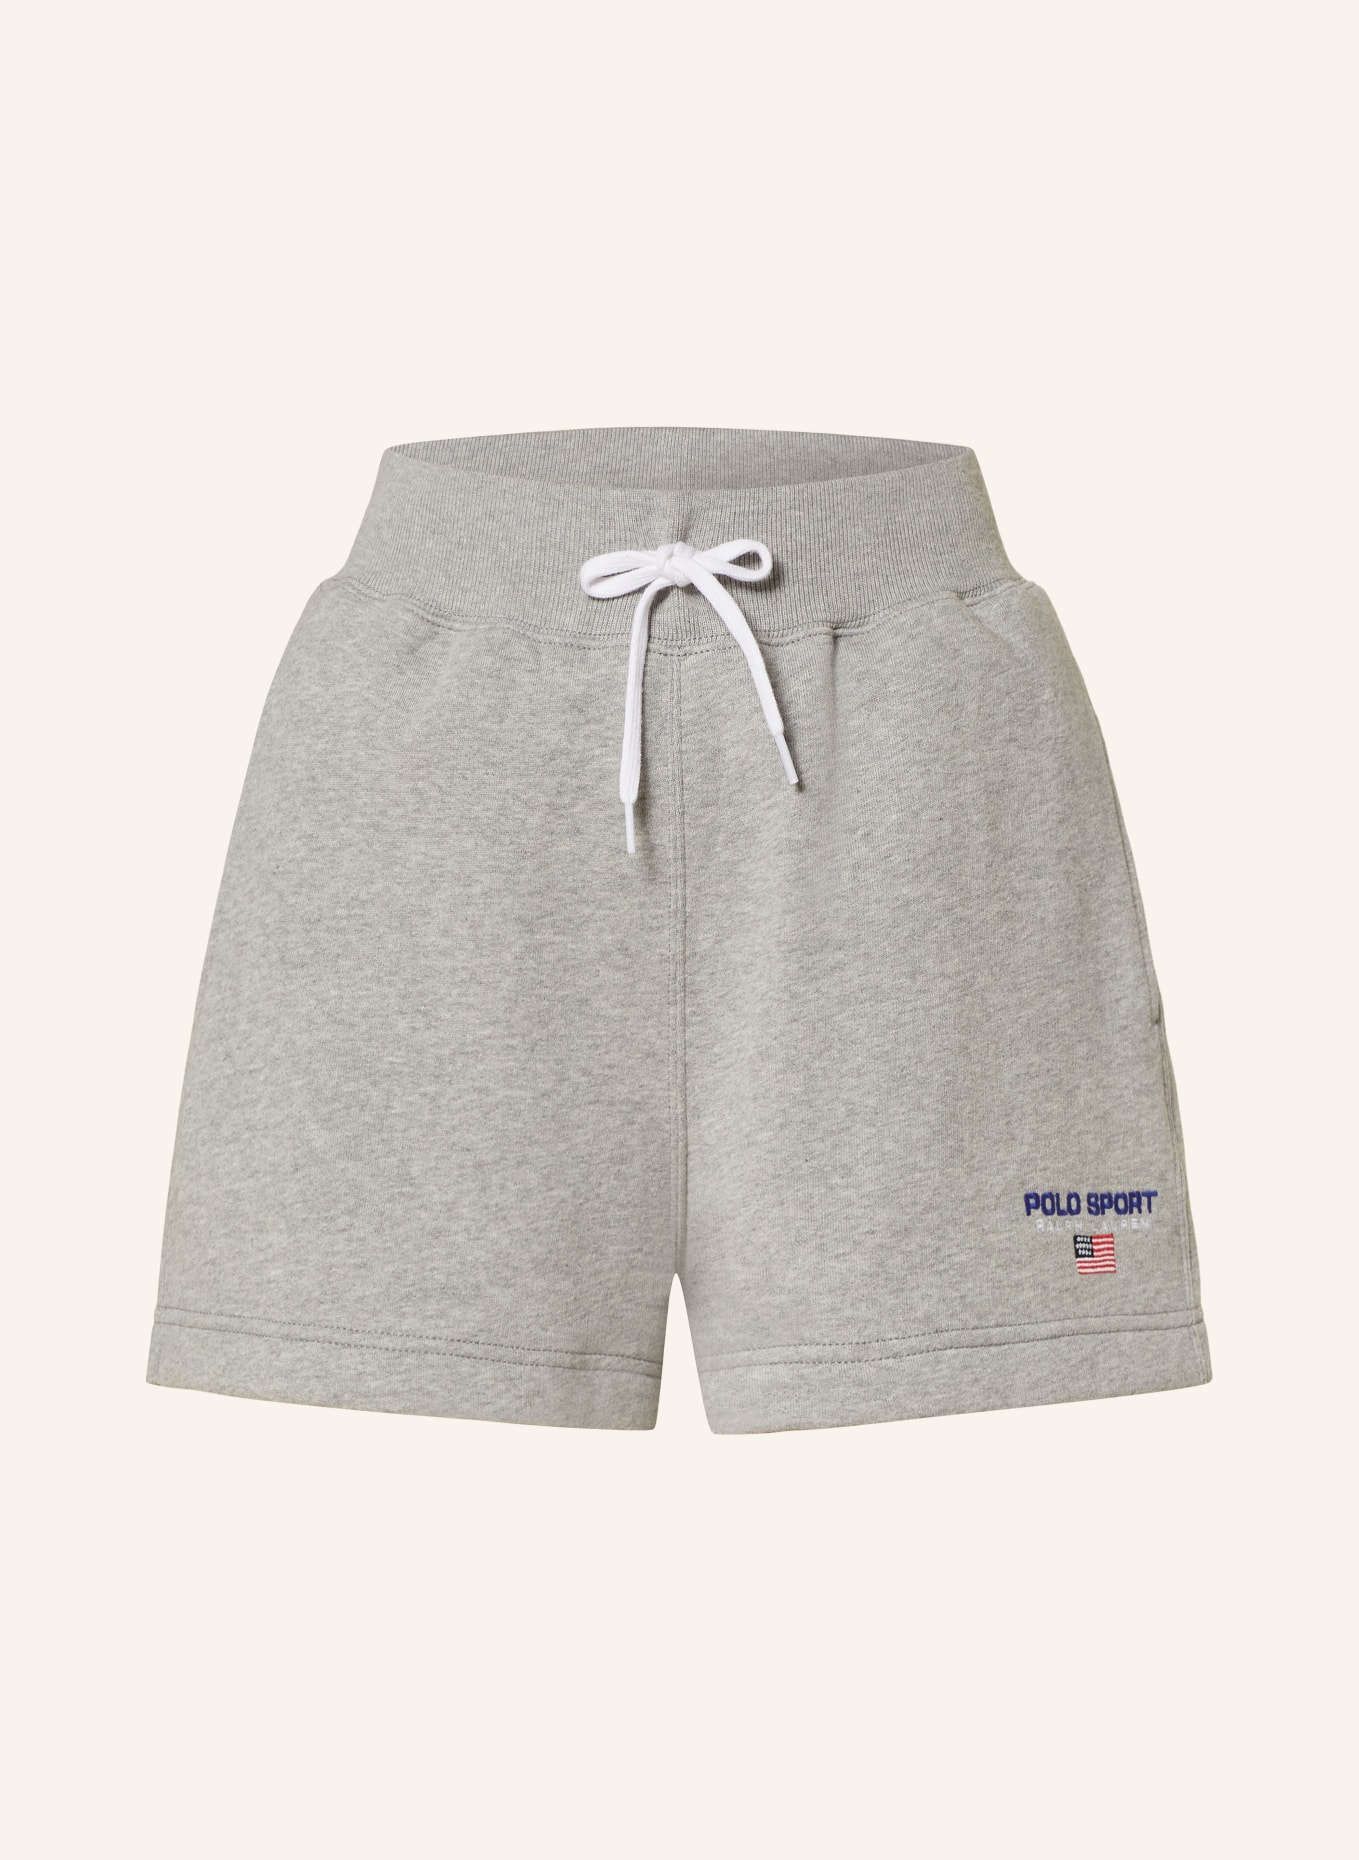 POLO SPORT Sweat shorts, Color: GRAY (Image 1)